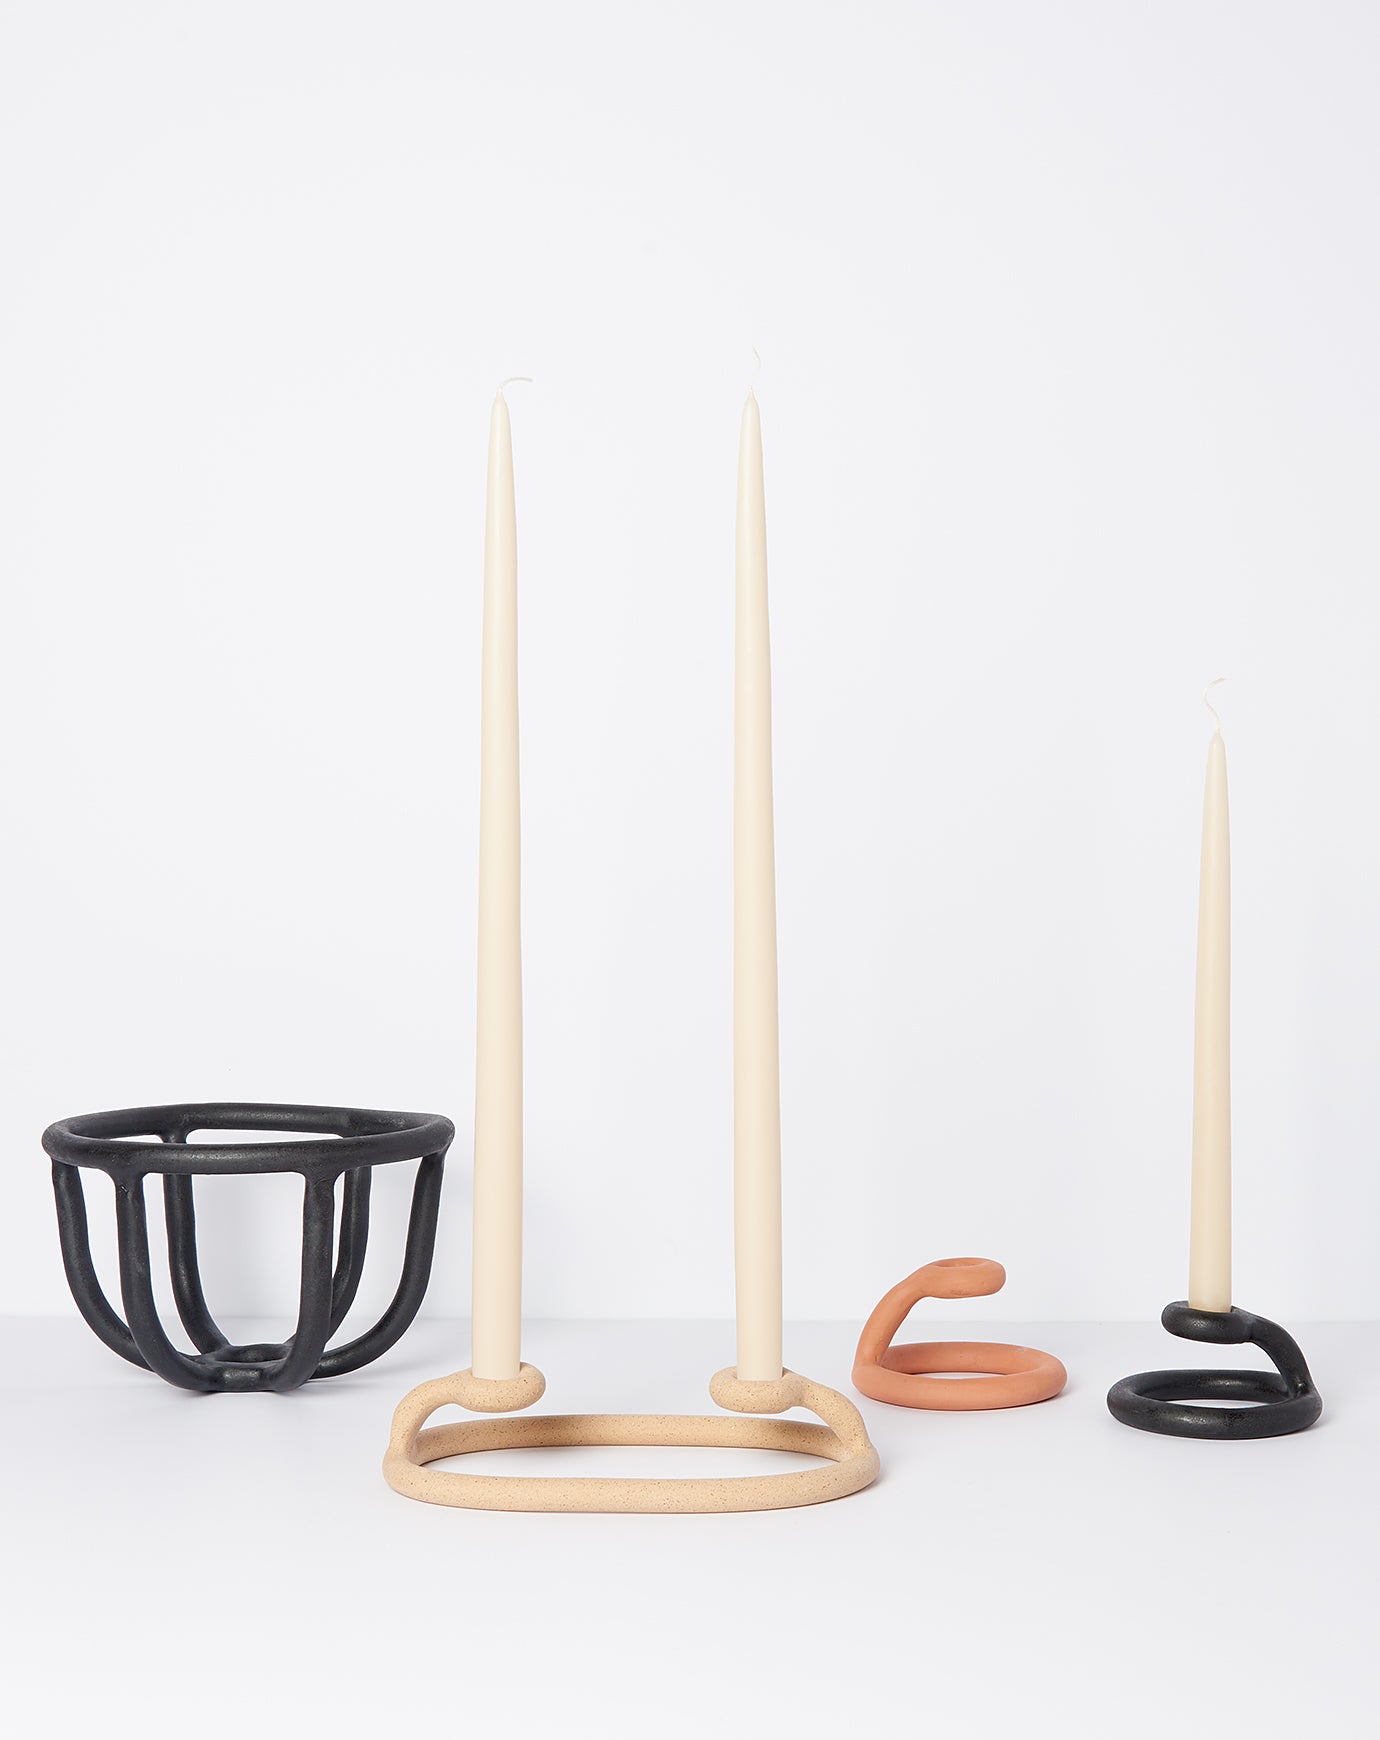 SIN Duo Candlestick in Spleckled